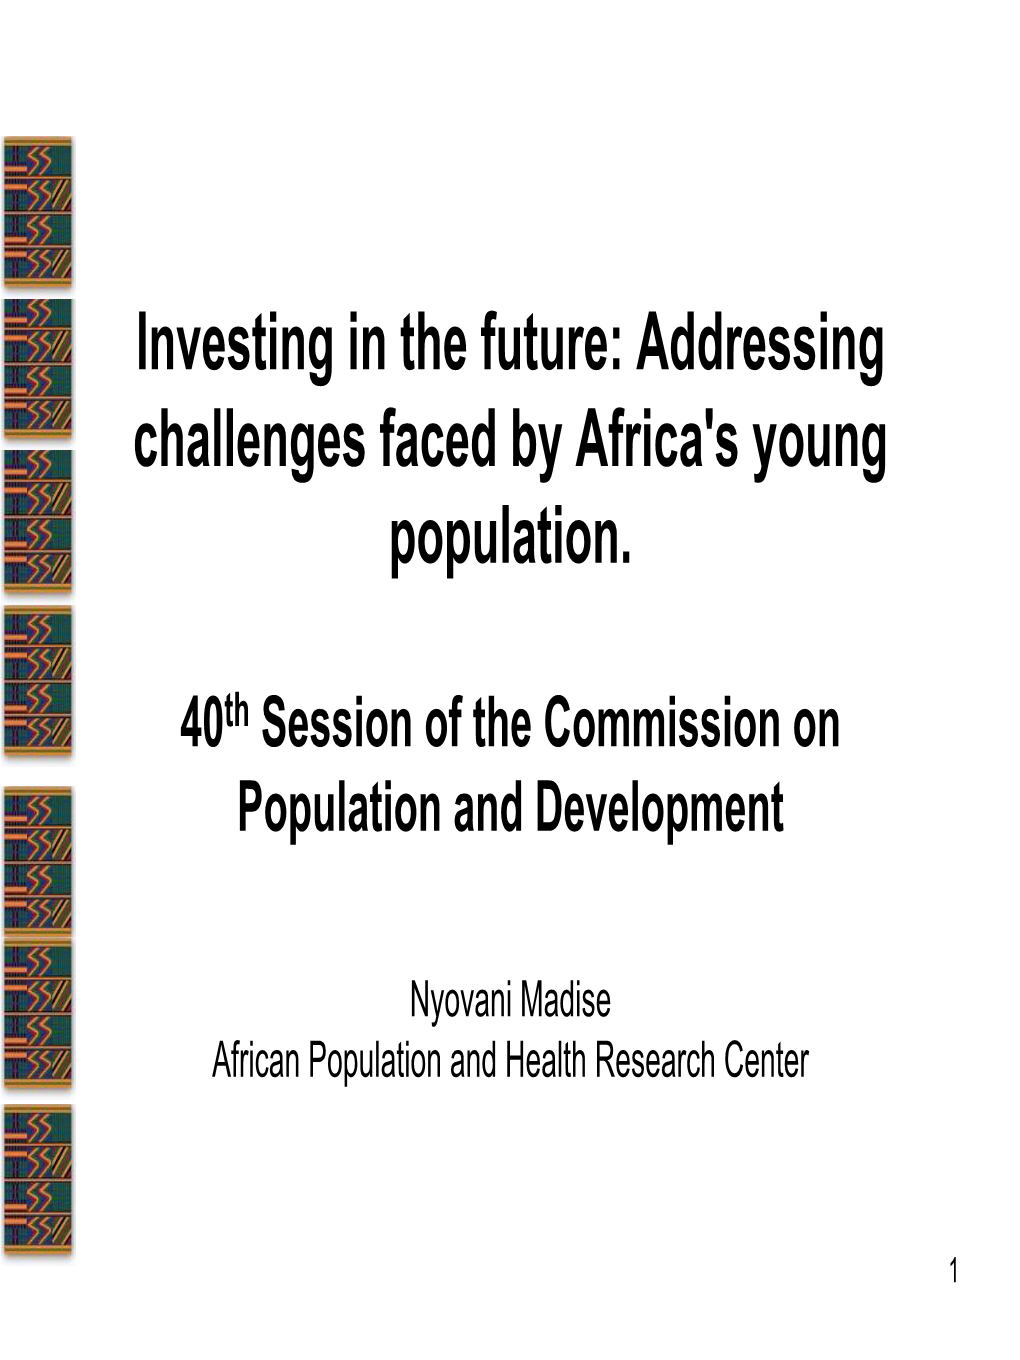 Addressing Challenges Faced by Africa's Young Population